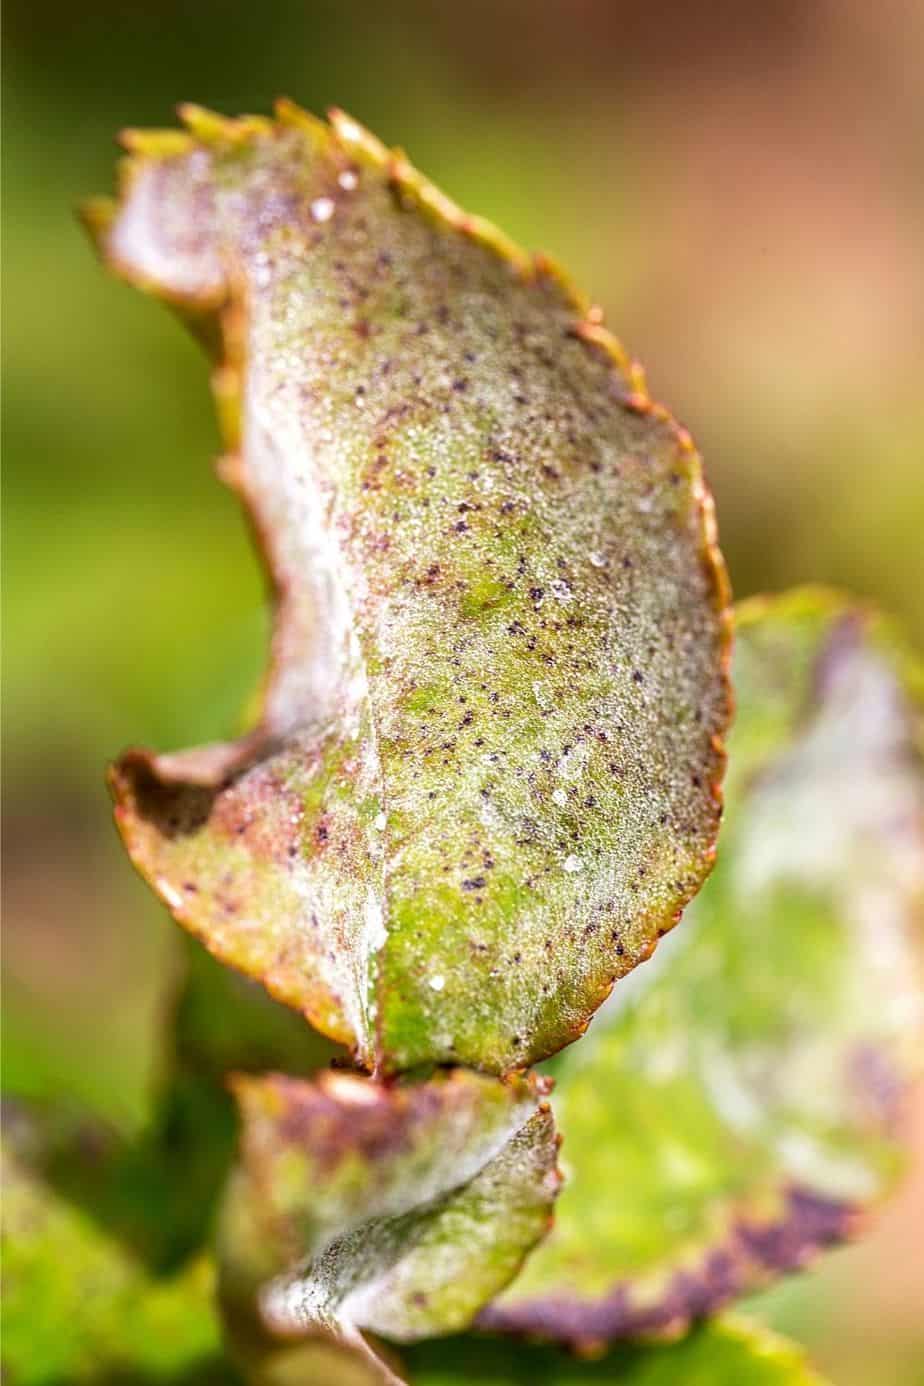 The leaves of a plant infected with powdery mildew gradually turn yellow before it dies